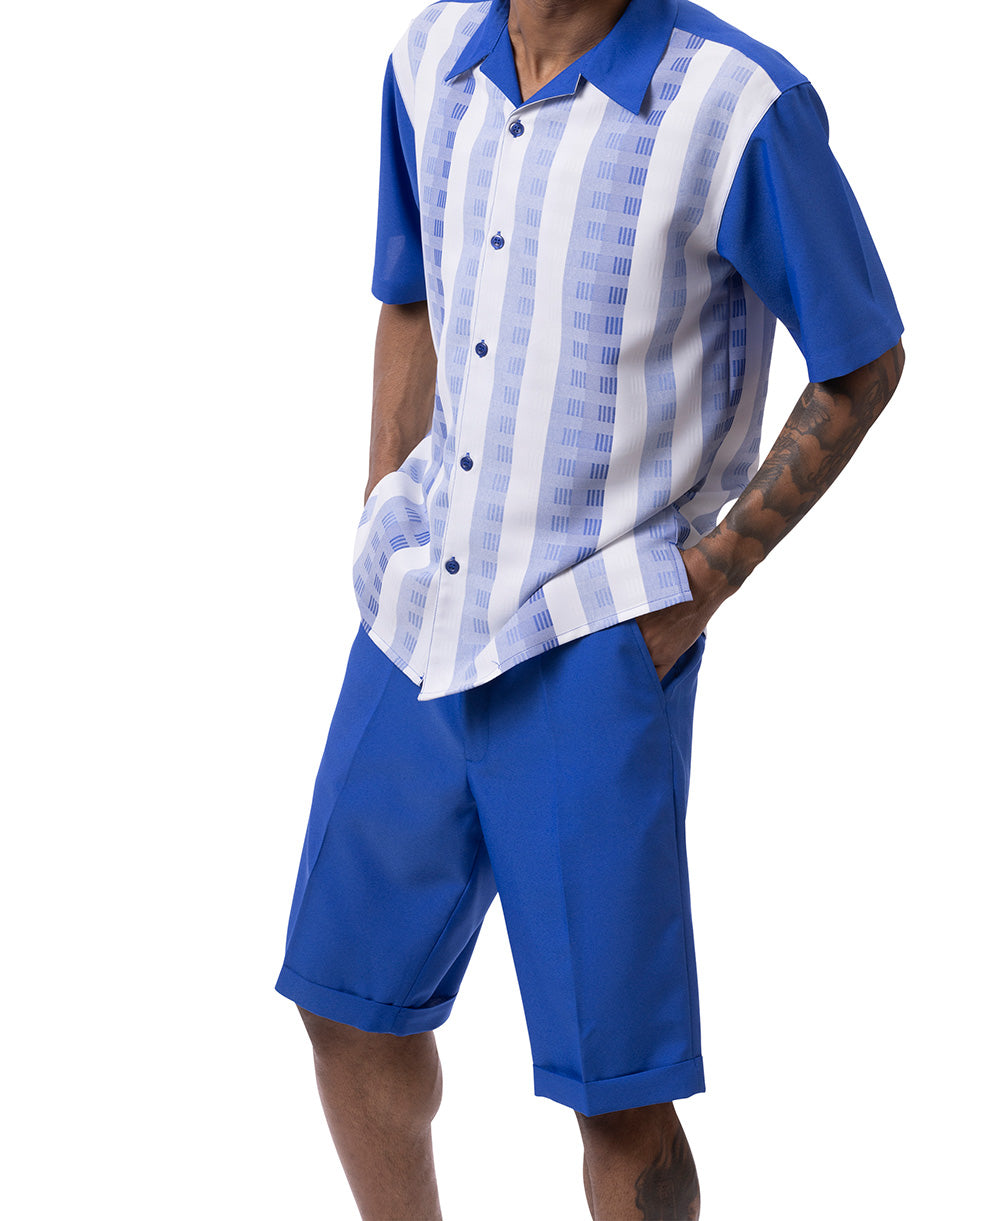 Royal Blue Color Striped Walking Suit 2 Piece Short Sleeve Set with Shorts